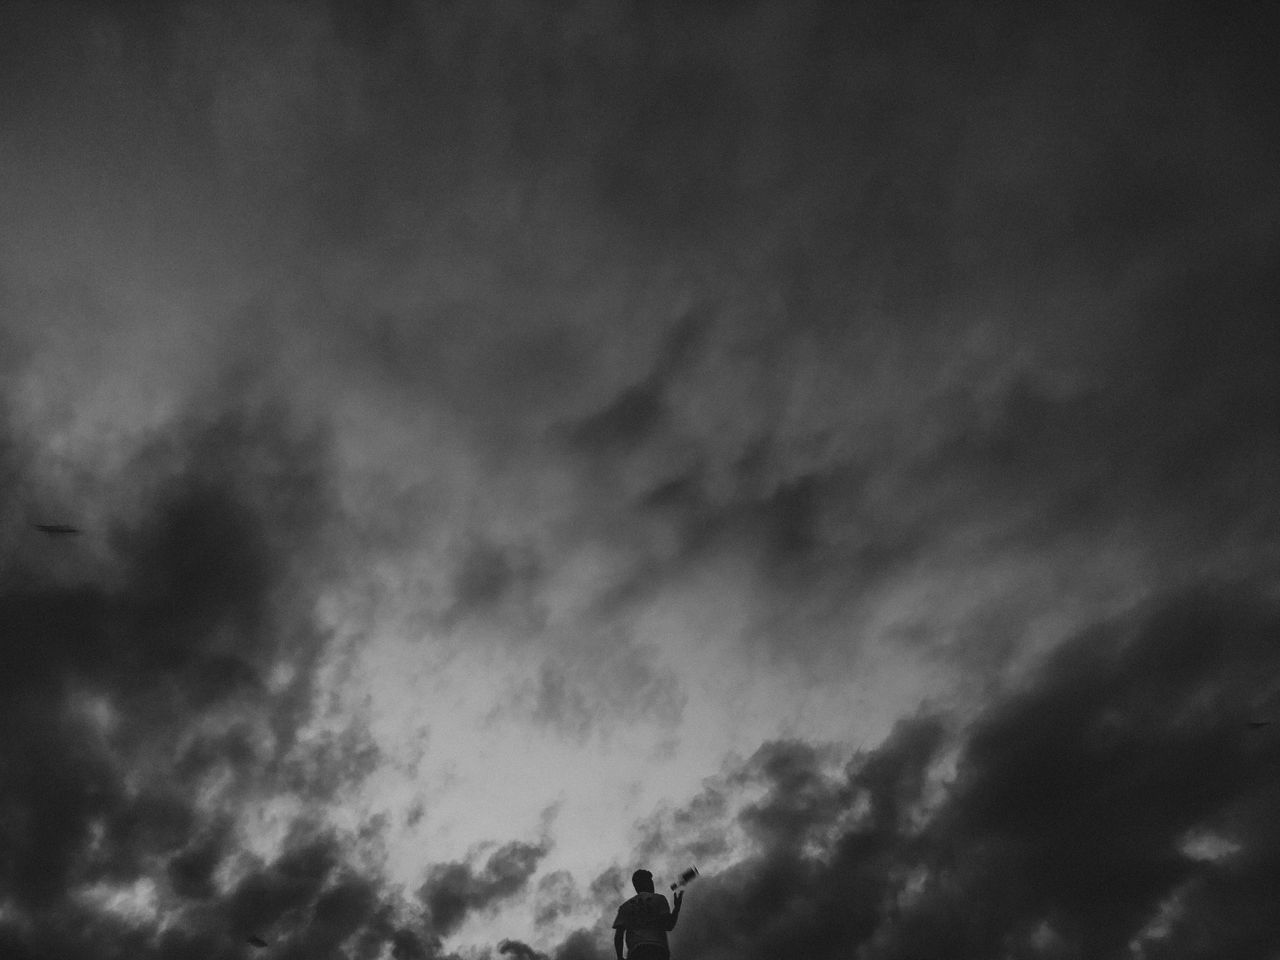 sky, cloud, darkness, black and white, monochrome, silhouette, monochrome photography, nature, storm, low angle view, beauty in nature, outdoors, overcast, thunder, dramatic sky, environment, storm cloud, cloudscape, dark, scenics - nature